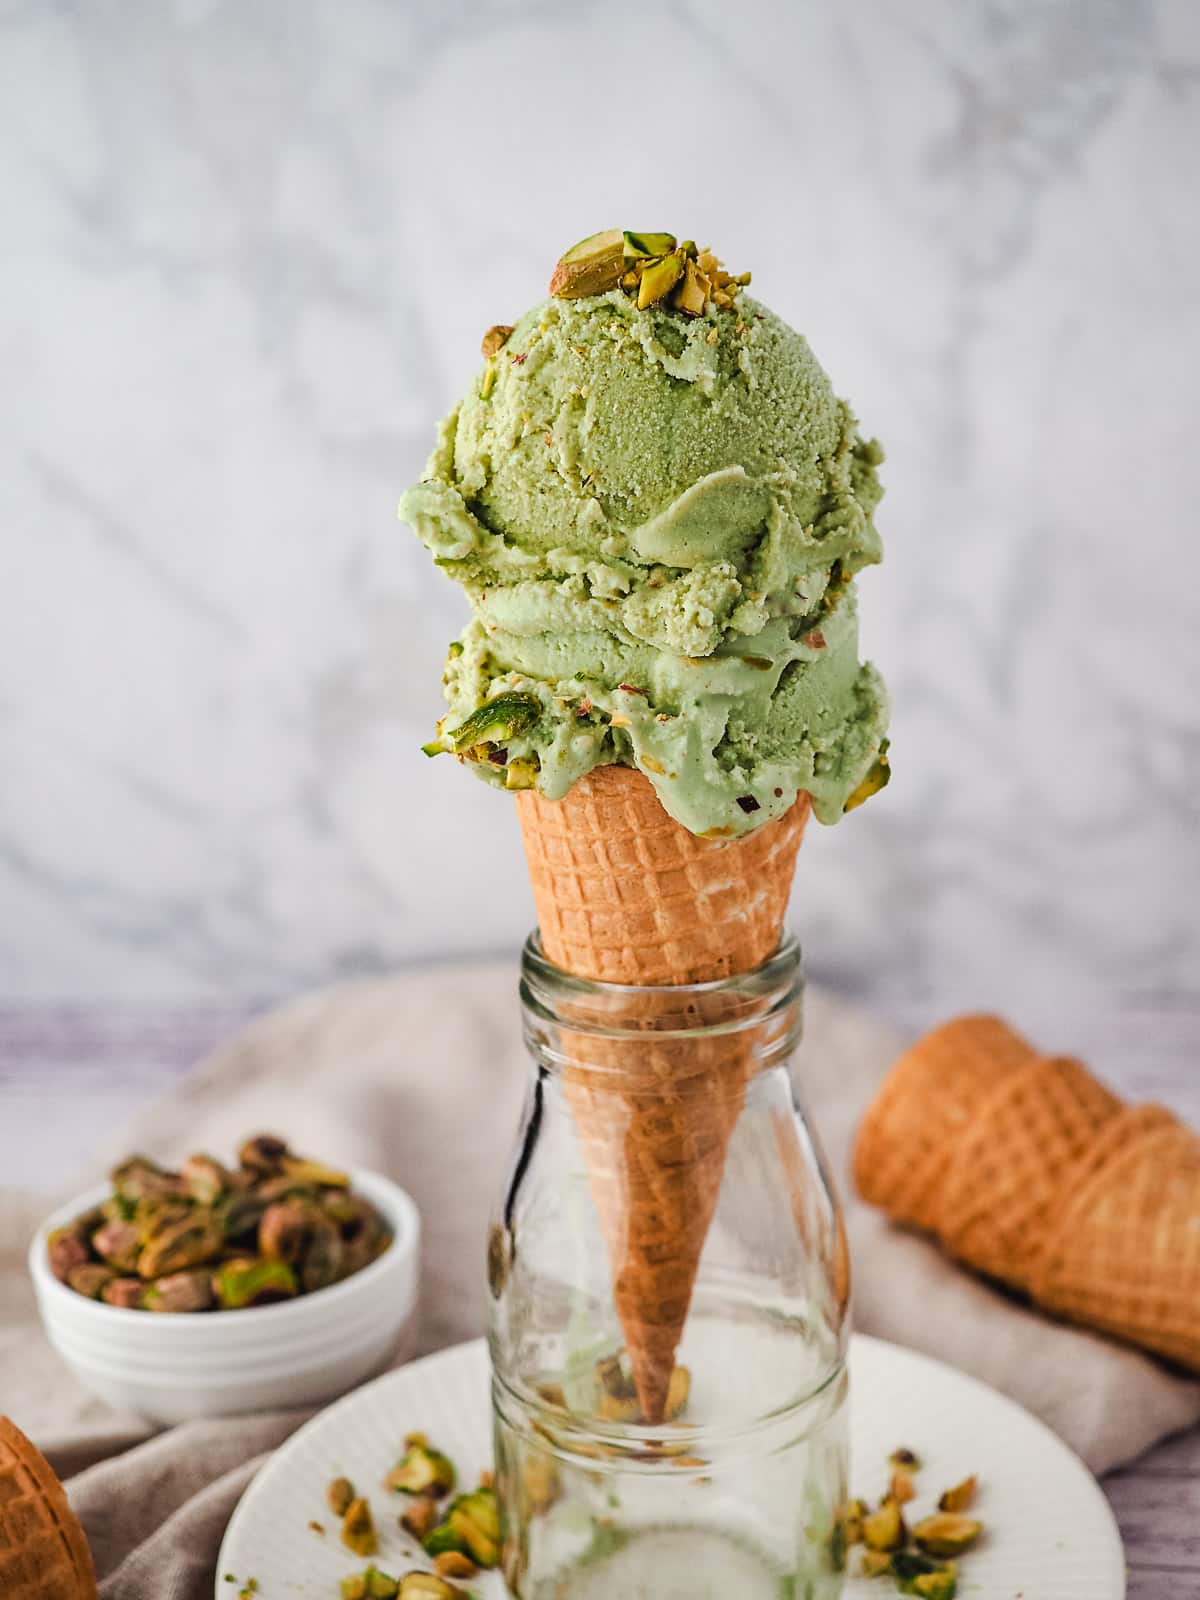 Two scoops of ice cream topped with pistachio pieces in a cone balanced in a glass jar, with pistachios and ice cream cones in the background.